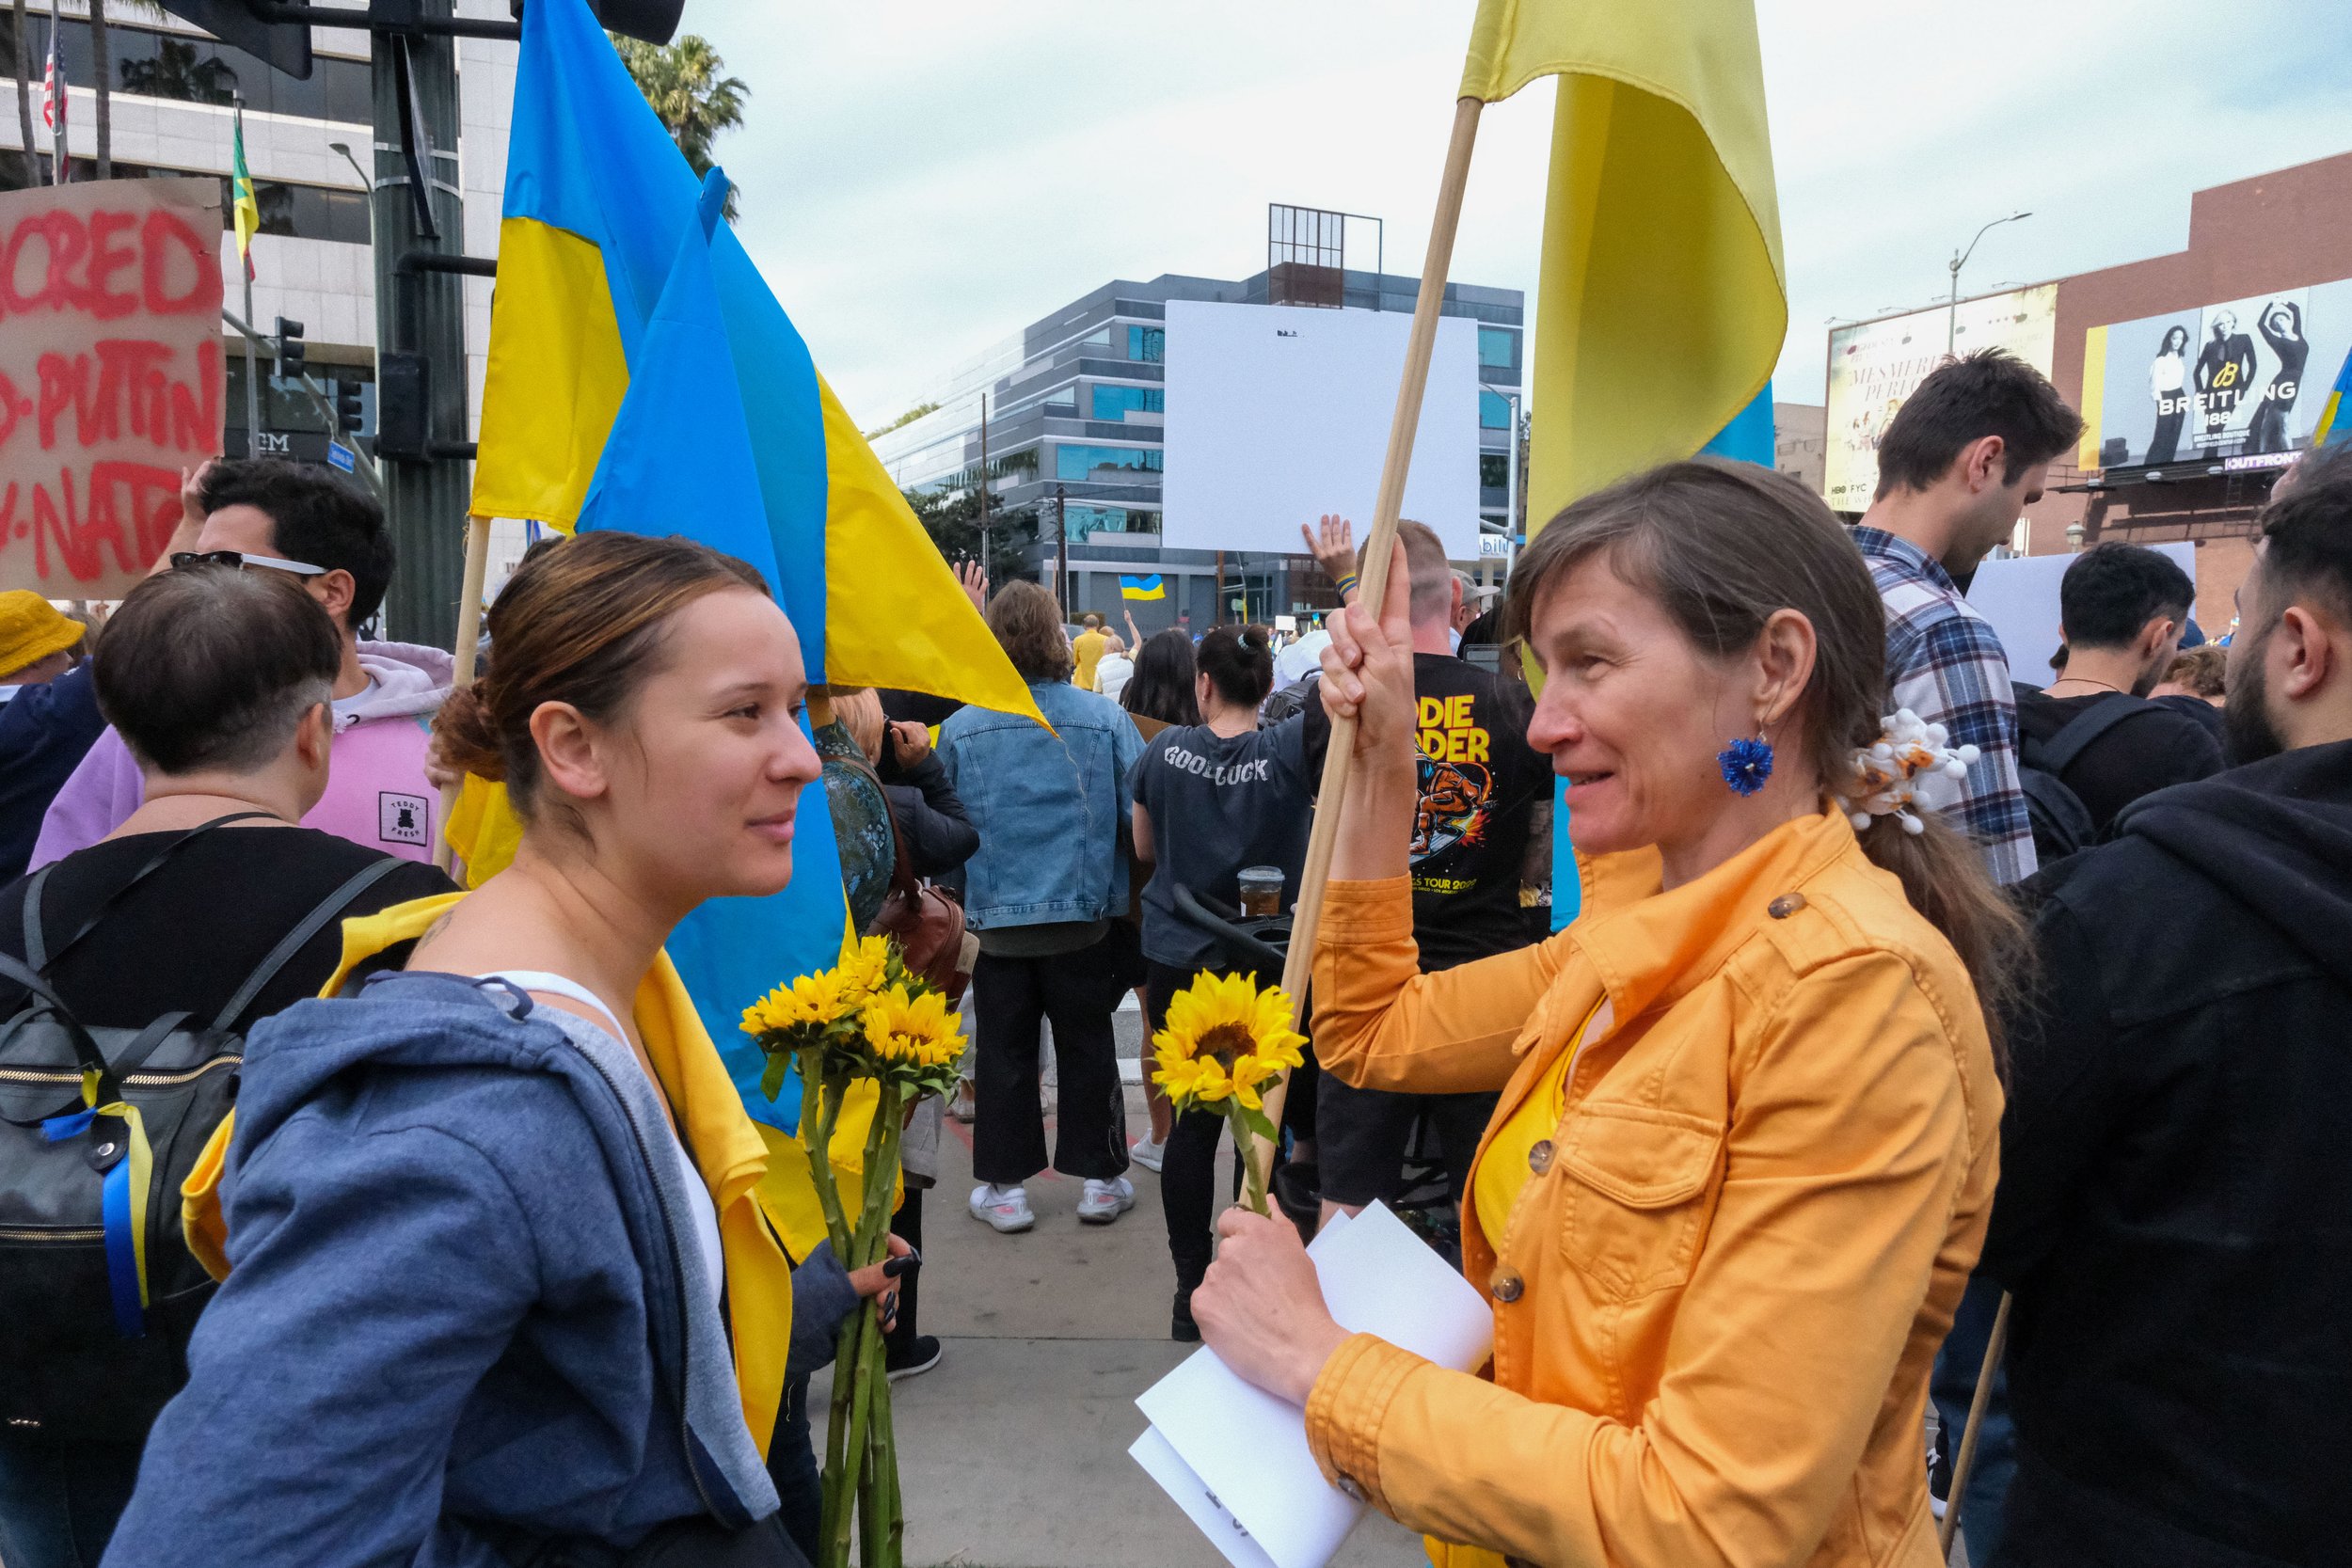  Two anti war protesters hold sunflowers and Ukranian flags as they discuss with one another, at the Rally to Stand with Ukraine in Westwood, Los Angeles, California on Saturday, February 26, 2022 (Anna Sophia Moltke | Corsair) 